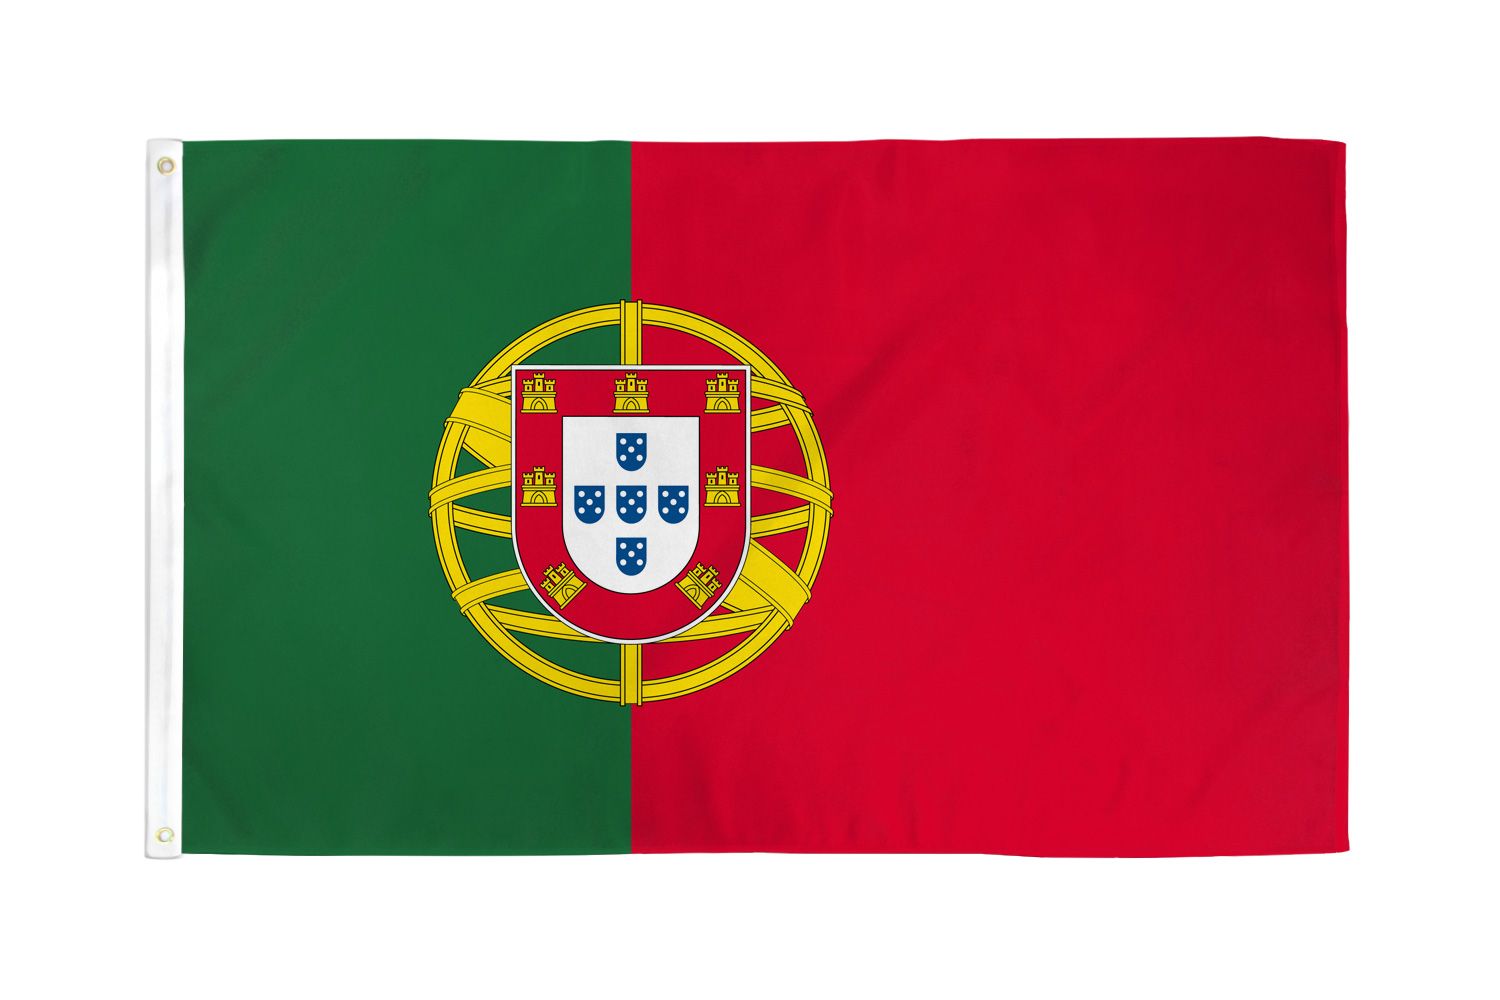 50 Feet 38 Flags ZXvZYT Portugal Portuguese Flag Banner String,Small Mini Portugal Pennant flags,For Grand Opening,Olympics,National Sports Events,Party Festival Decorations 